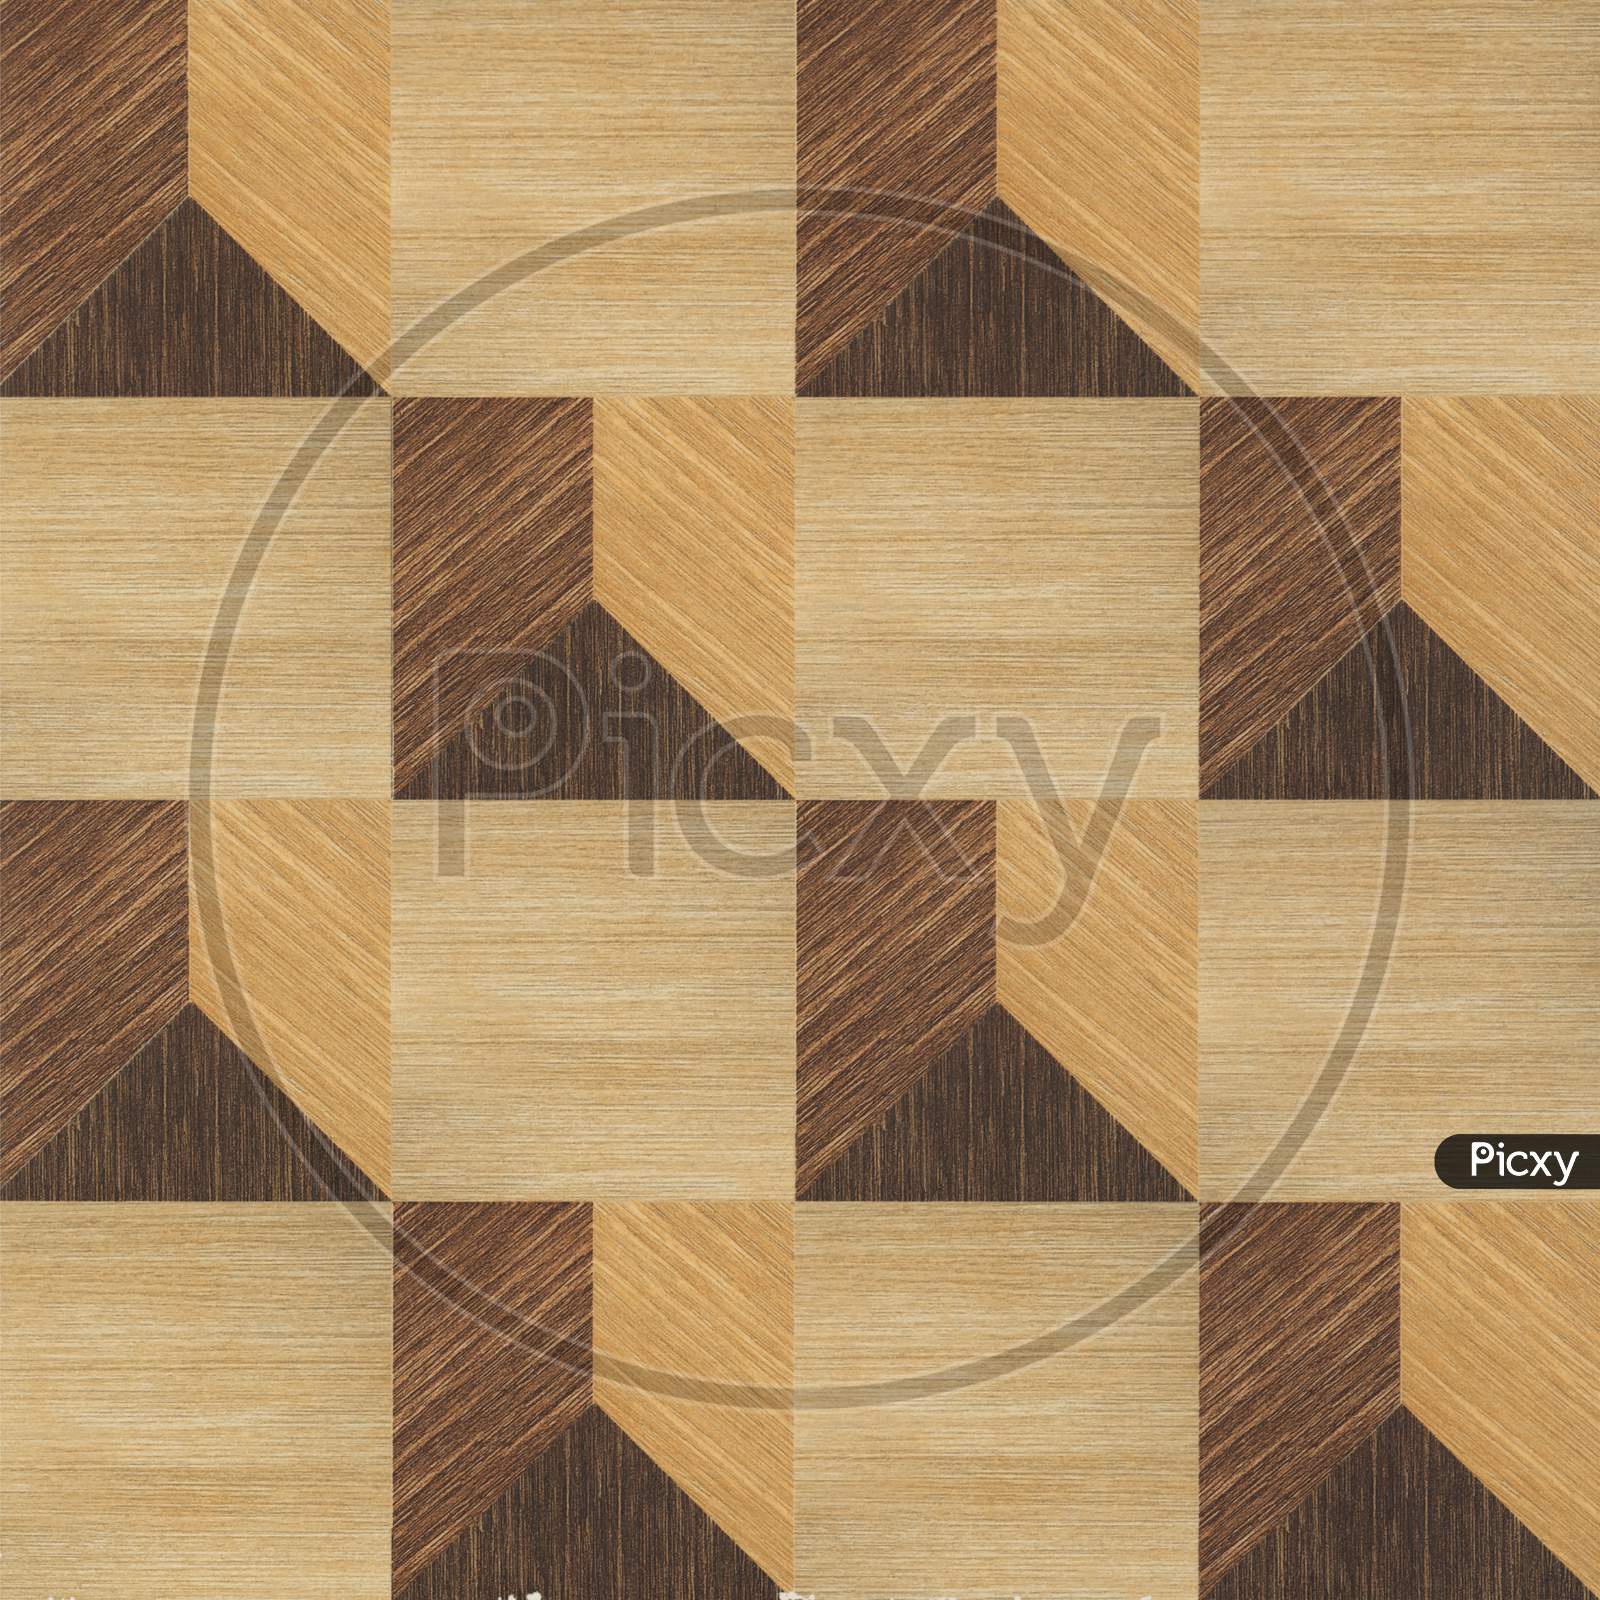 Abstract Mosaic Pattern Wooden Ceramic Texture Tile.